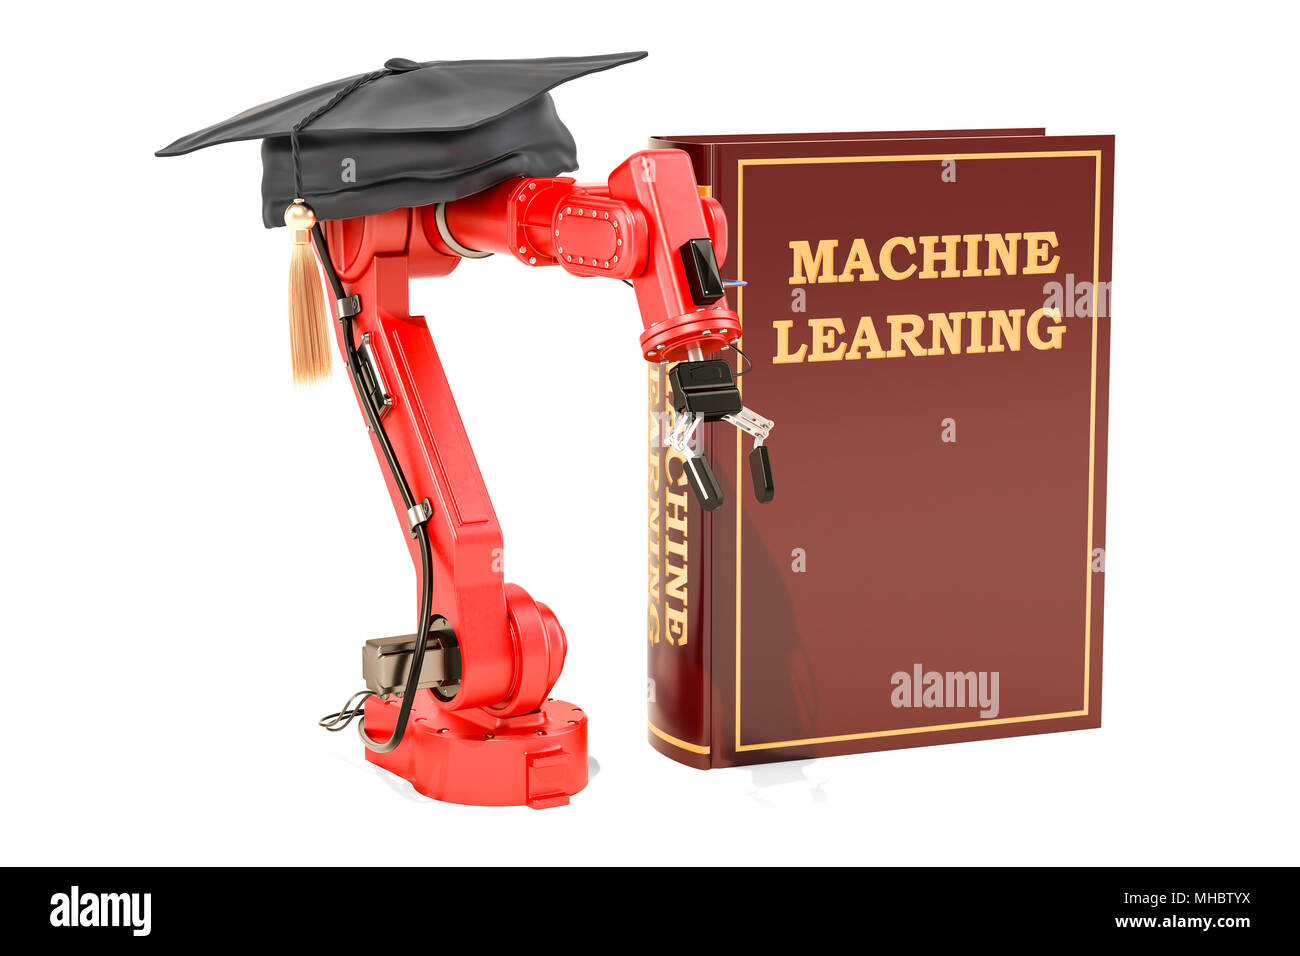 Healthcare technology machine learning Cut Out Stock Images & Pictures -  Alamy